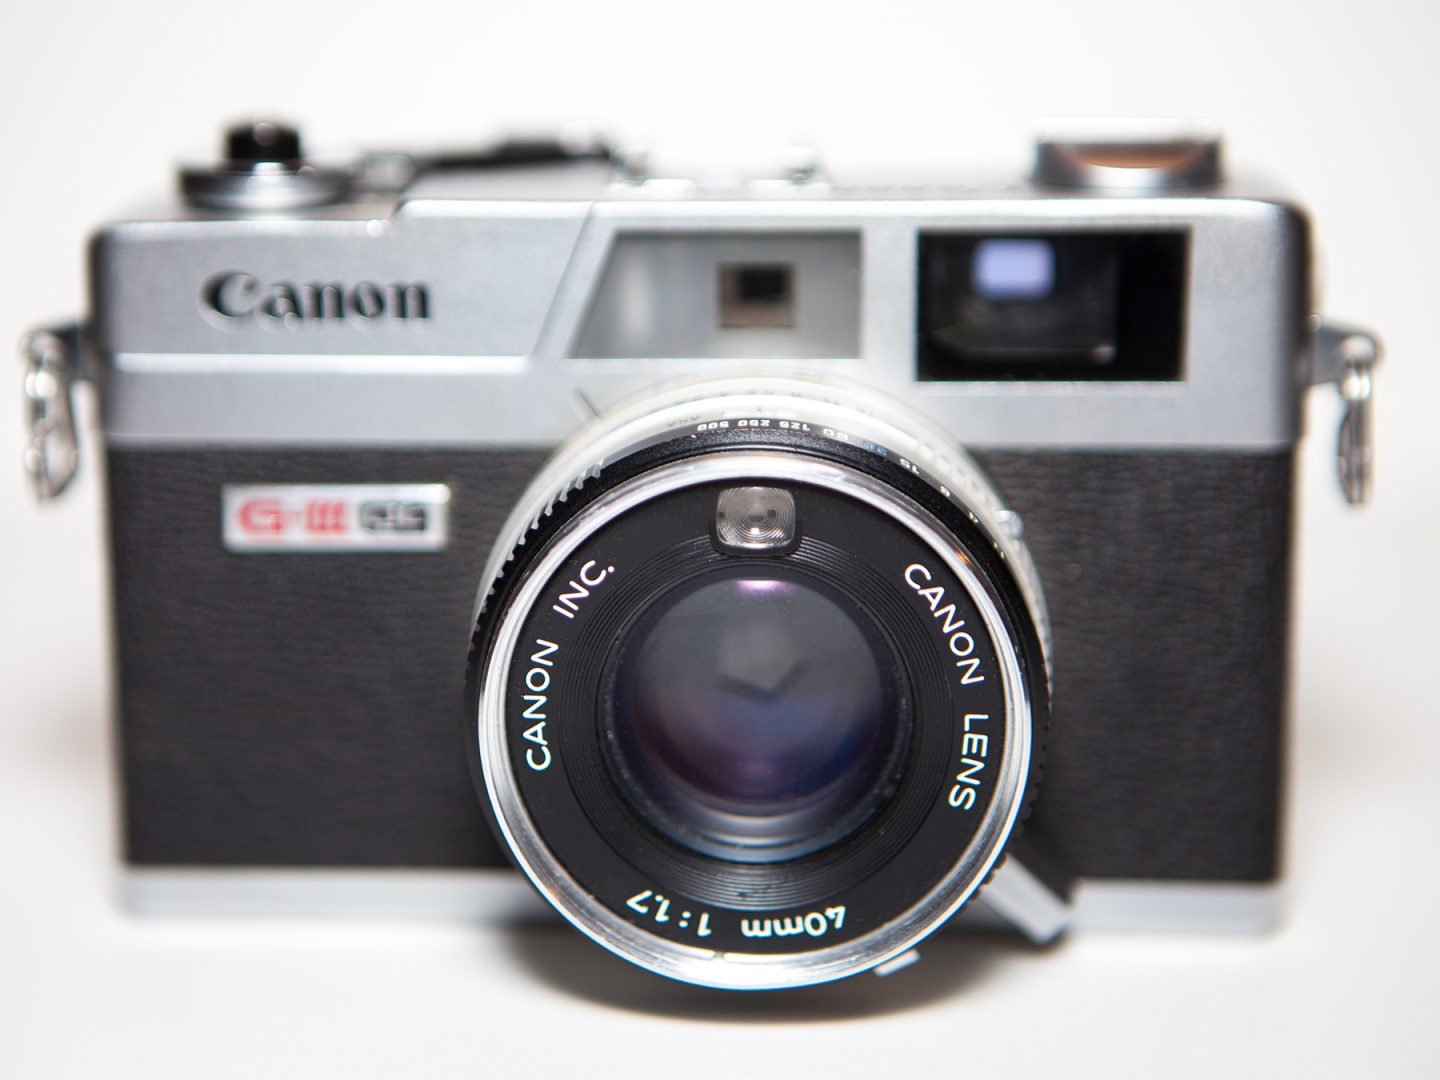 Canon Canonet GIII QL17 Rangefinder 35mm camera review